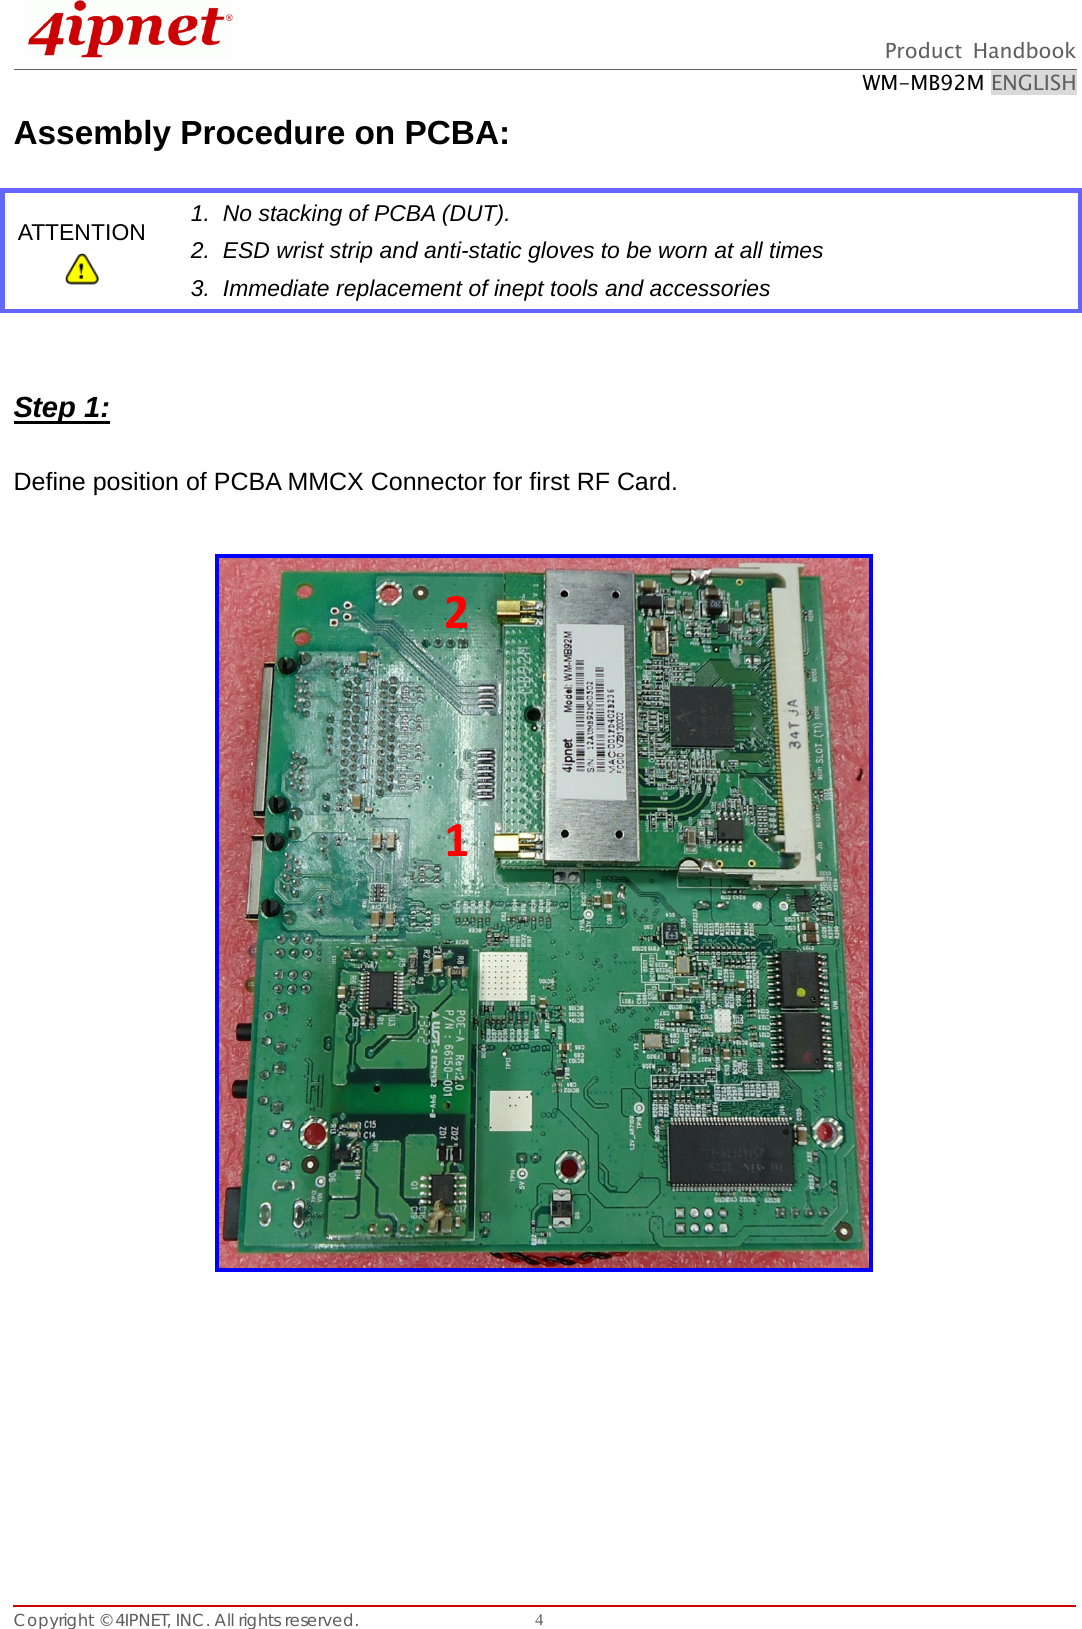  Product Handbook WM-MB92M ENGLISH Copyright © 4IPNET, INC. All rights reserved.    4Assembly Procedure on PCBA:       Step 1:  Define position of PCBA MMCX Connector for first RF Card.              ATTENTION  1.  No stacking of PCBA (DUT).   2.  ESD wrist strip and anti-static gloves to be worn at all times 3.  Immediate replacement of inept tools and accessories 1 2 